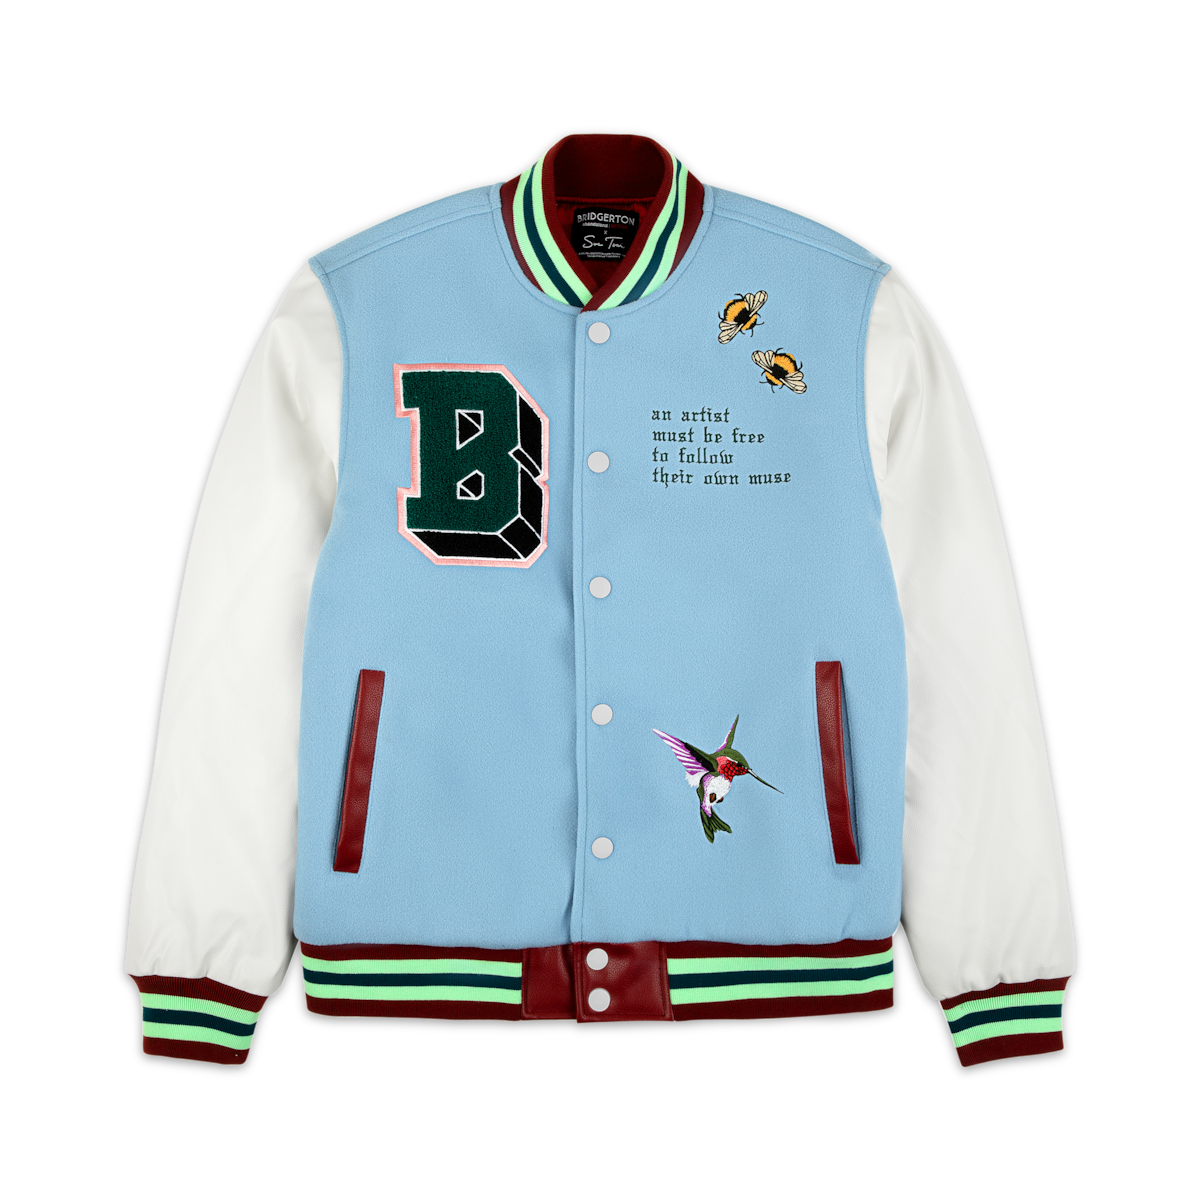 A letterman jacket featuring a hummingbird and bees designed for the ‘Bridgerton’ Artist Series